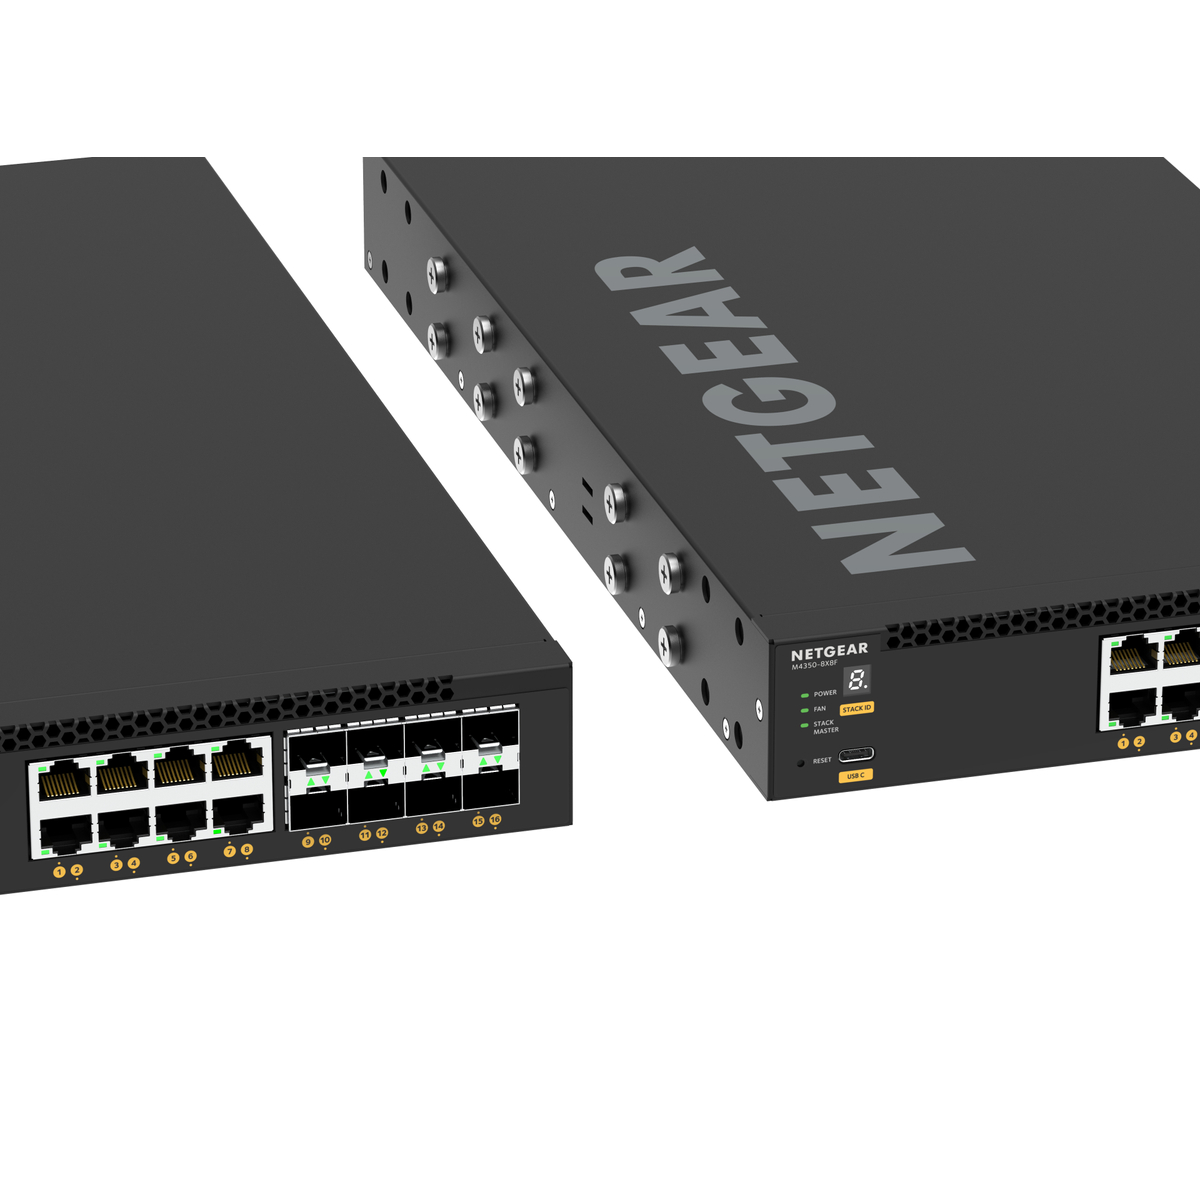 M4350-8X8F Fully Managed Switch